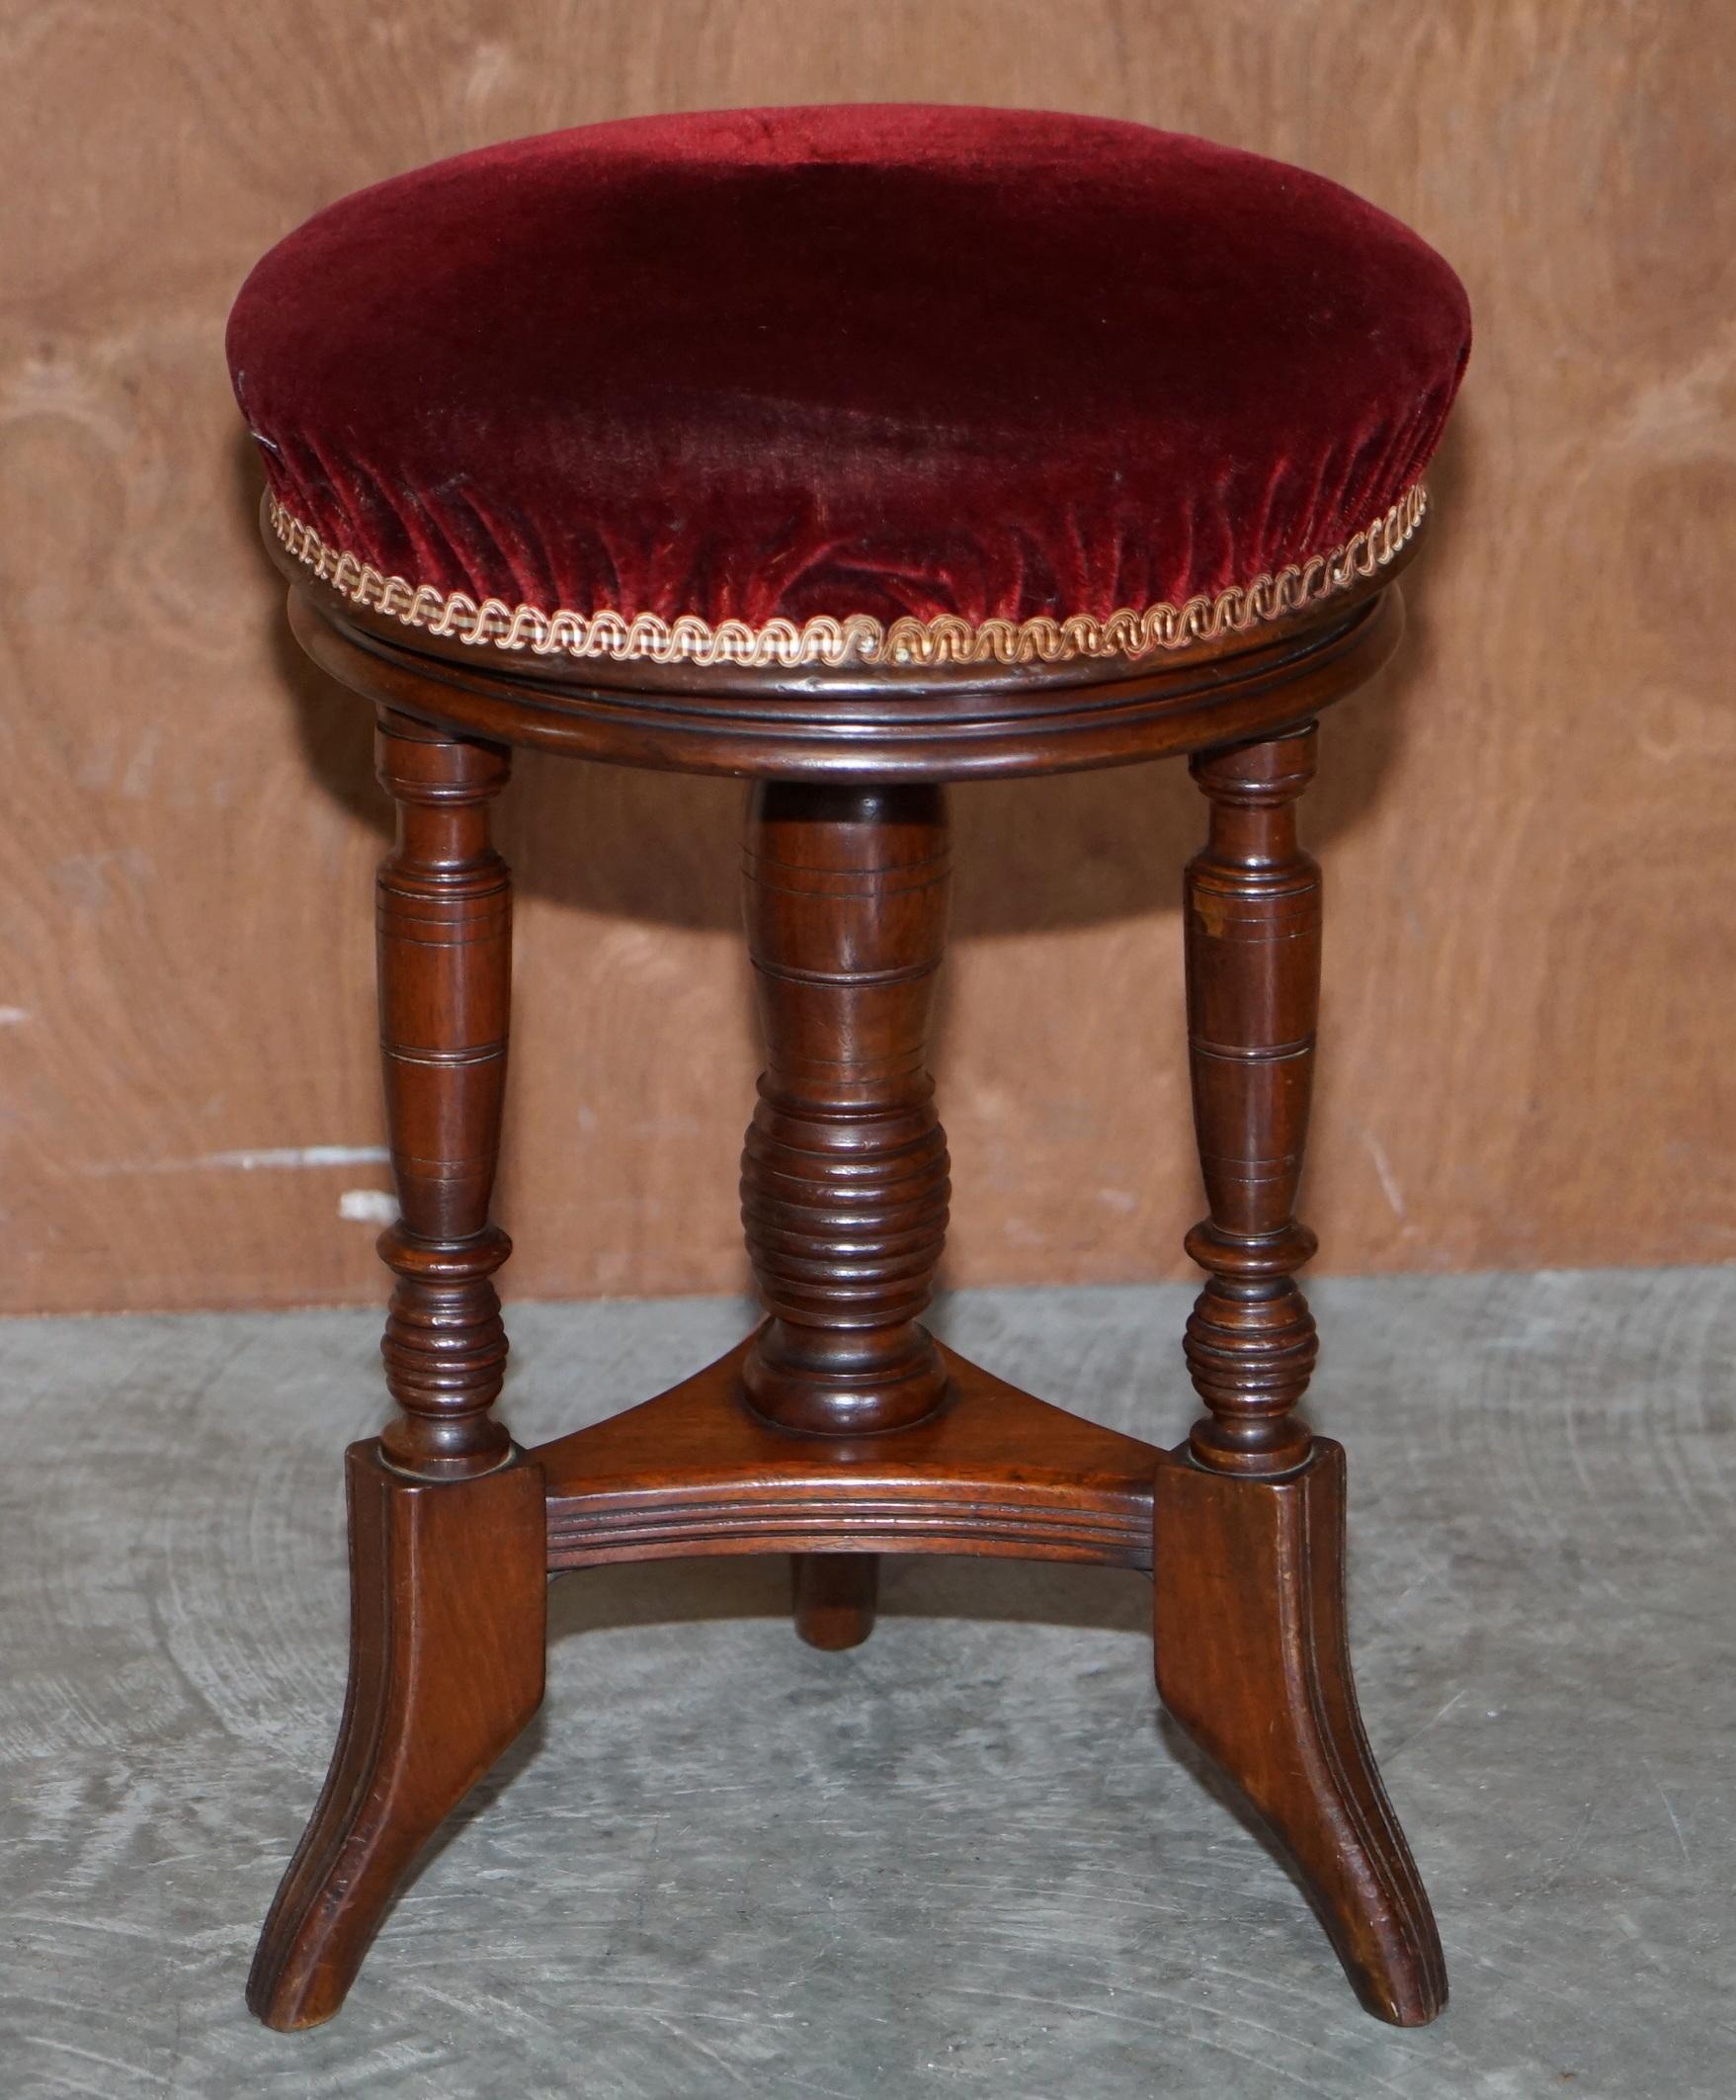 Upholstery Antique Victorian Hardwood Piano Stool with Decorative Base Height Adjustable For Sale